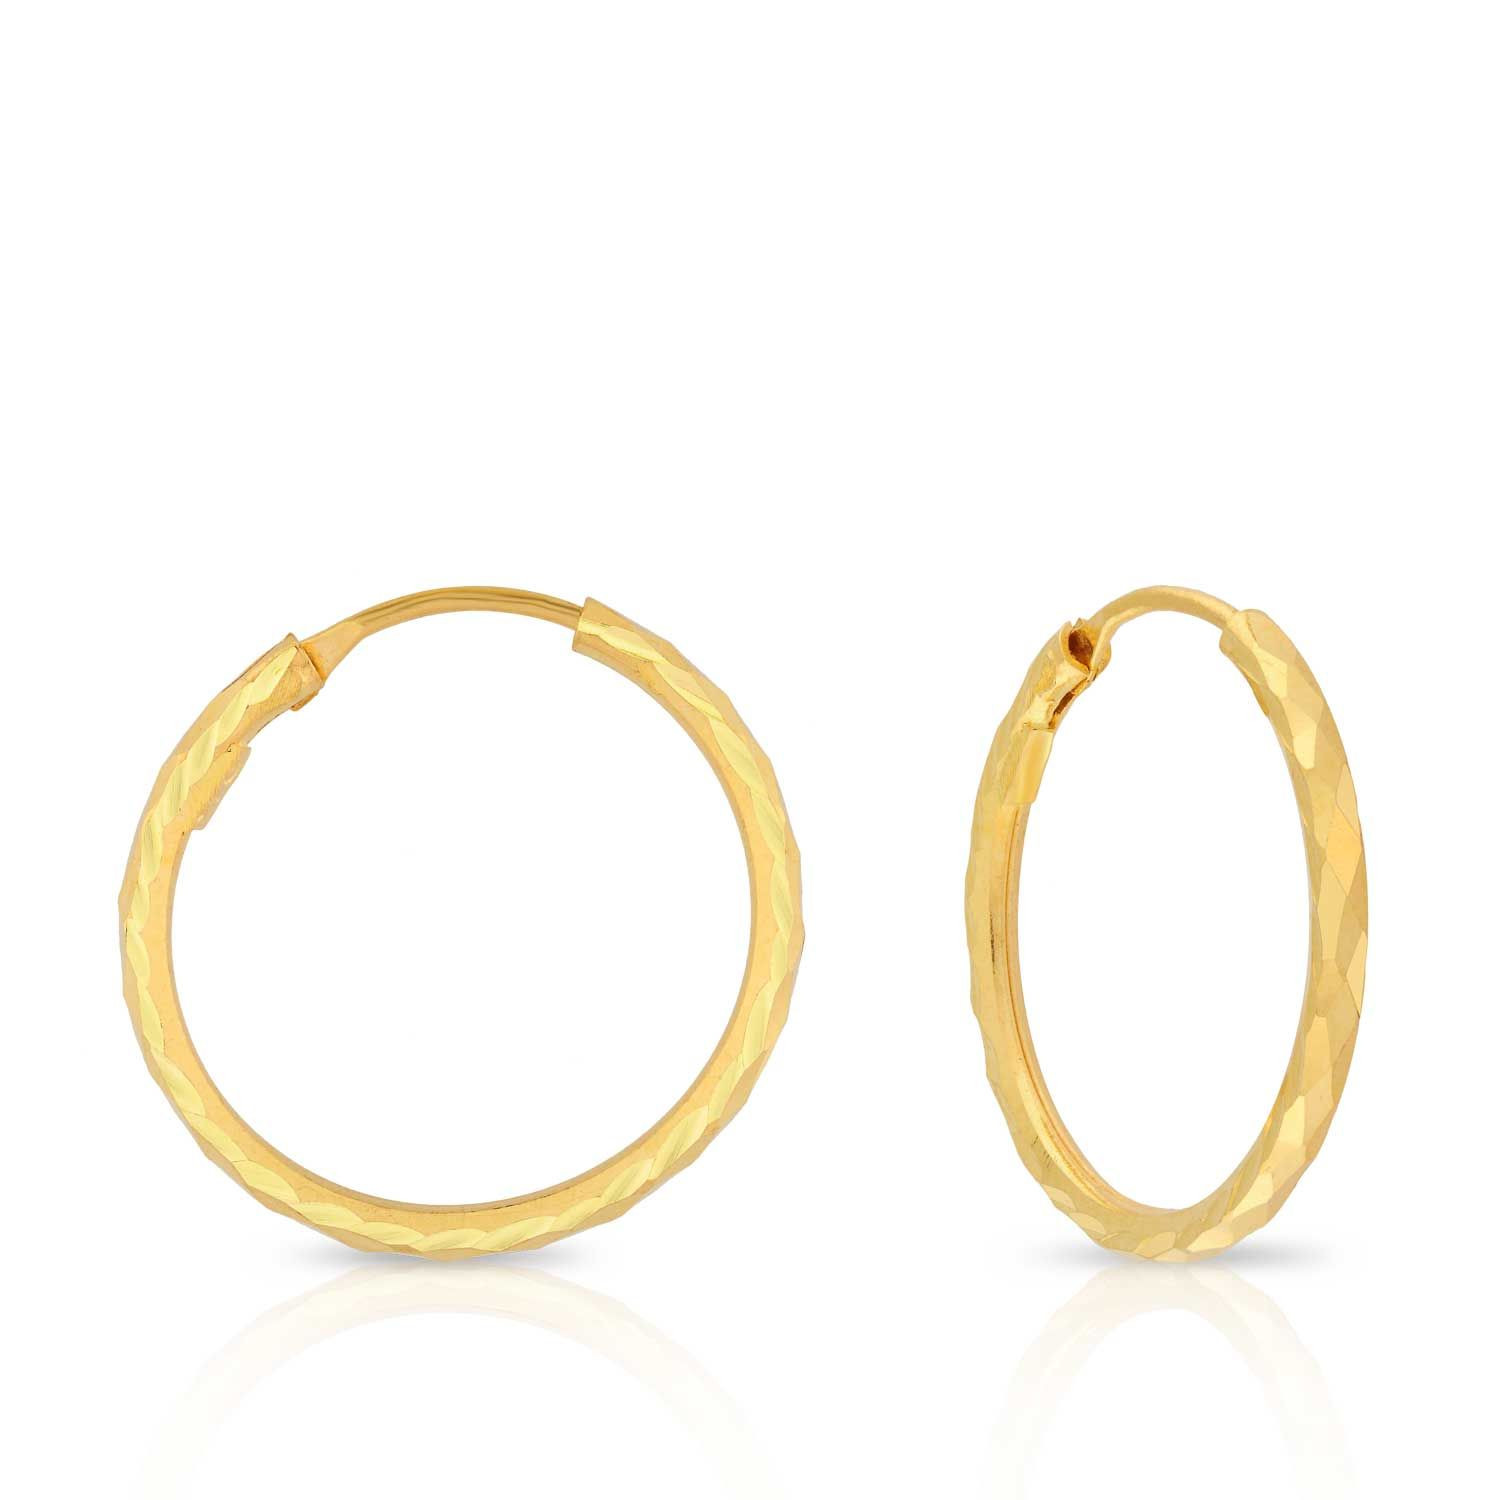 baby earrings in malabar gold with price - Caption Update